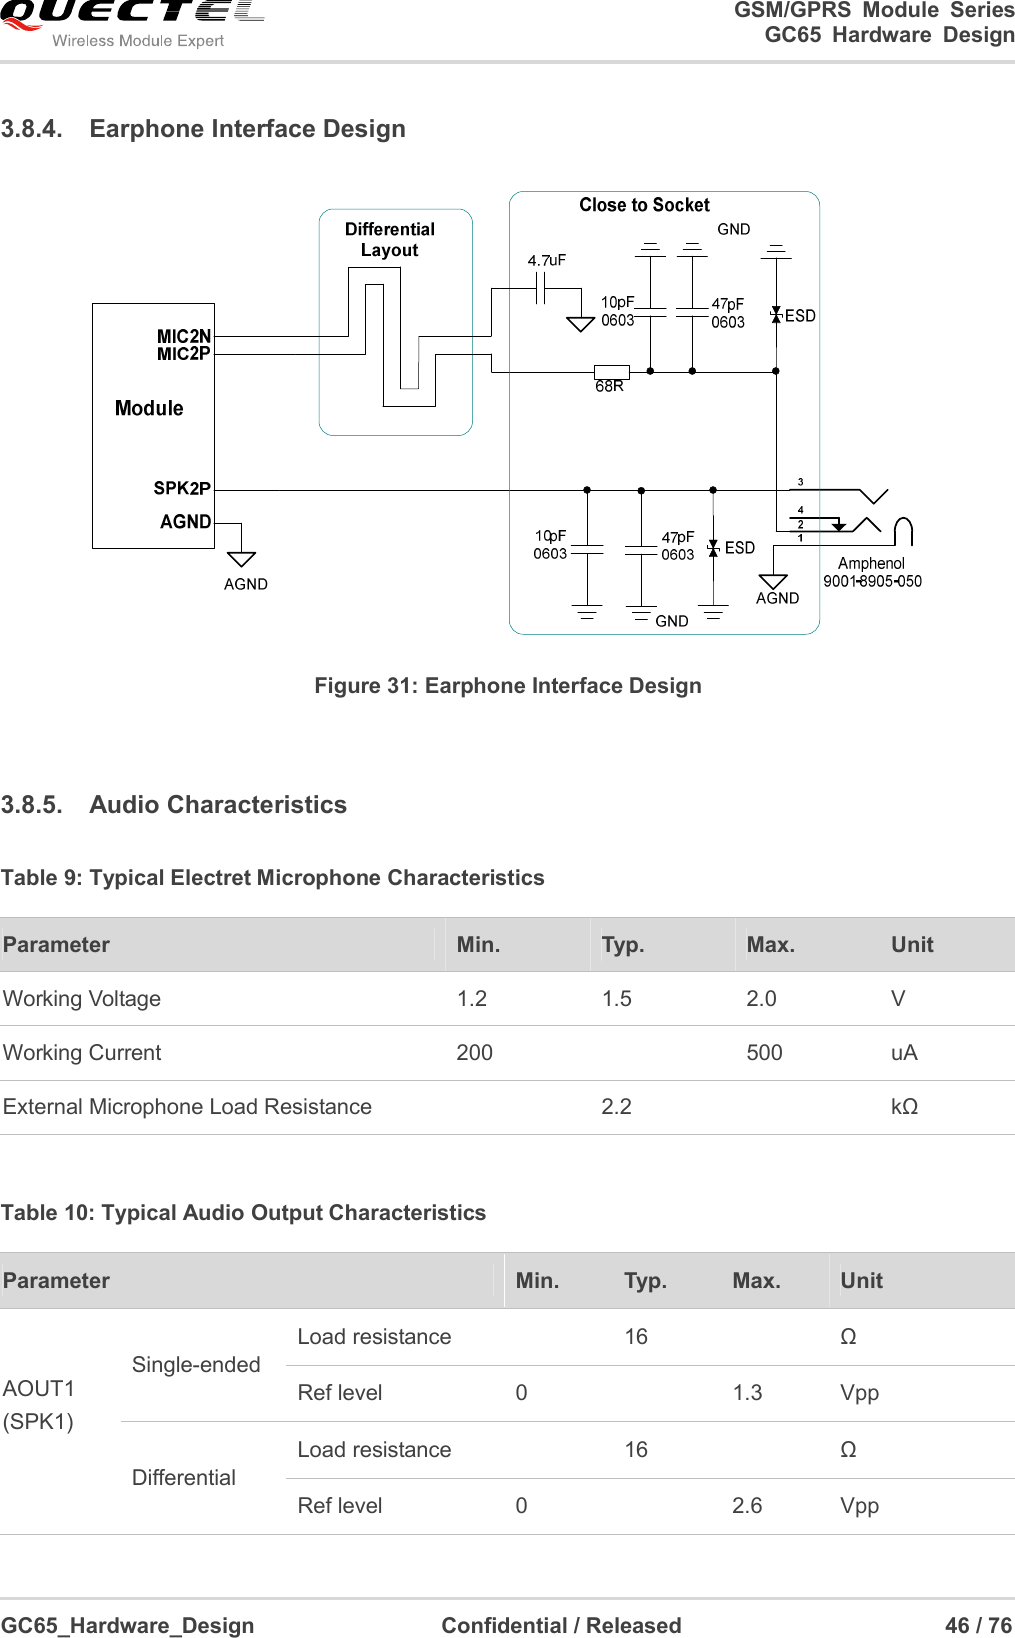                                                                          GSM/GPRS  Module  Series                                                                 GC65 Hardware Design  GC65_Hardware_Design                                  Confidential / Released                                                46 / 76      3.8.4.  Earphone Interface Design  Figure 31: Earphone Interface Design  3.8.5.  Audio Characteristics Table 9: Typical Electret Microphone Characteristics  Table 10: Typical Audio Output Characteristics Parameter  Min.  Typ.  Max.  Unit Working Voltage  1.2  1.5  2.0  V Working Current  200    500  uA External Microphone Load Resistance    2.2    kΩ Parameter  Min.  Typ.  Max.  Unit AOUT1 (SPK1)  Single-ended  Load resistance    16    Ω Ref level  0    1.3  Vpp Differential Load resistance    16    Ω Ref level  0    2.6  Vpp 